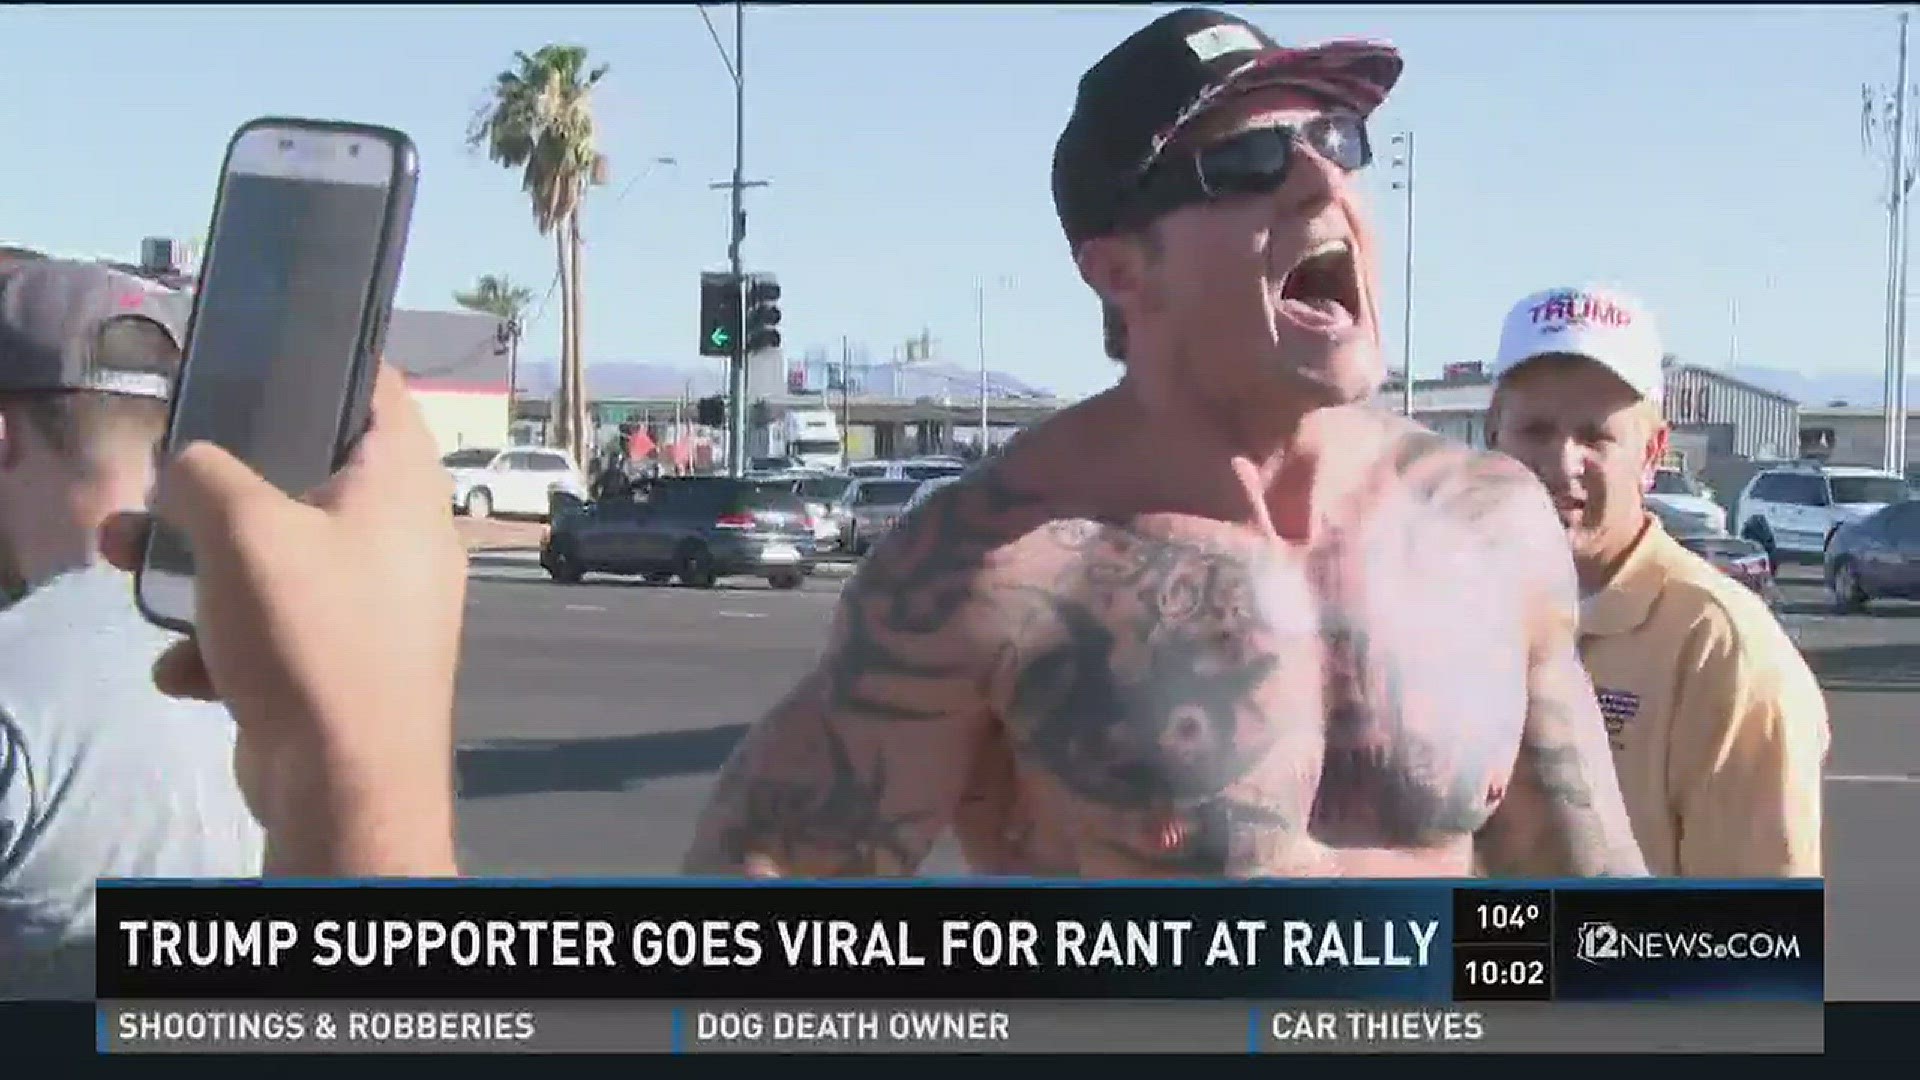 Trump supporter goes viral for rant at rally.